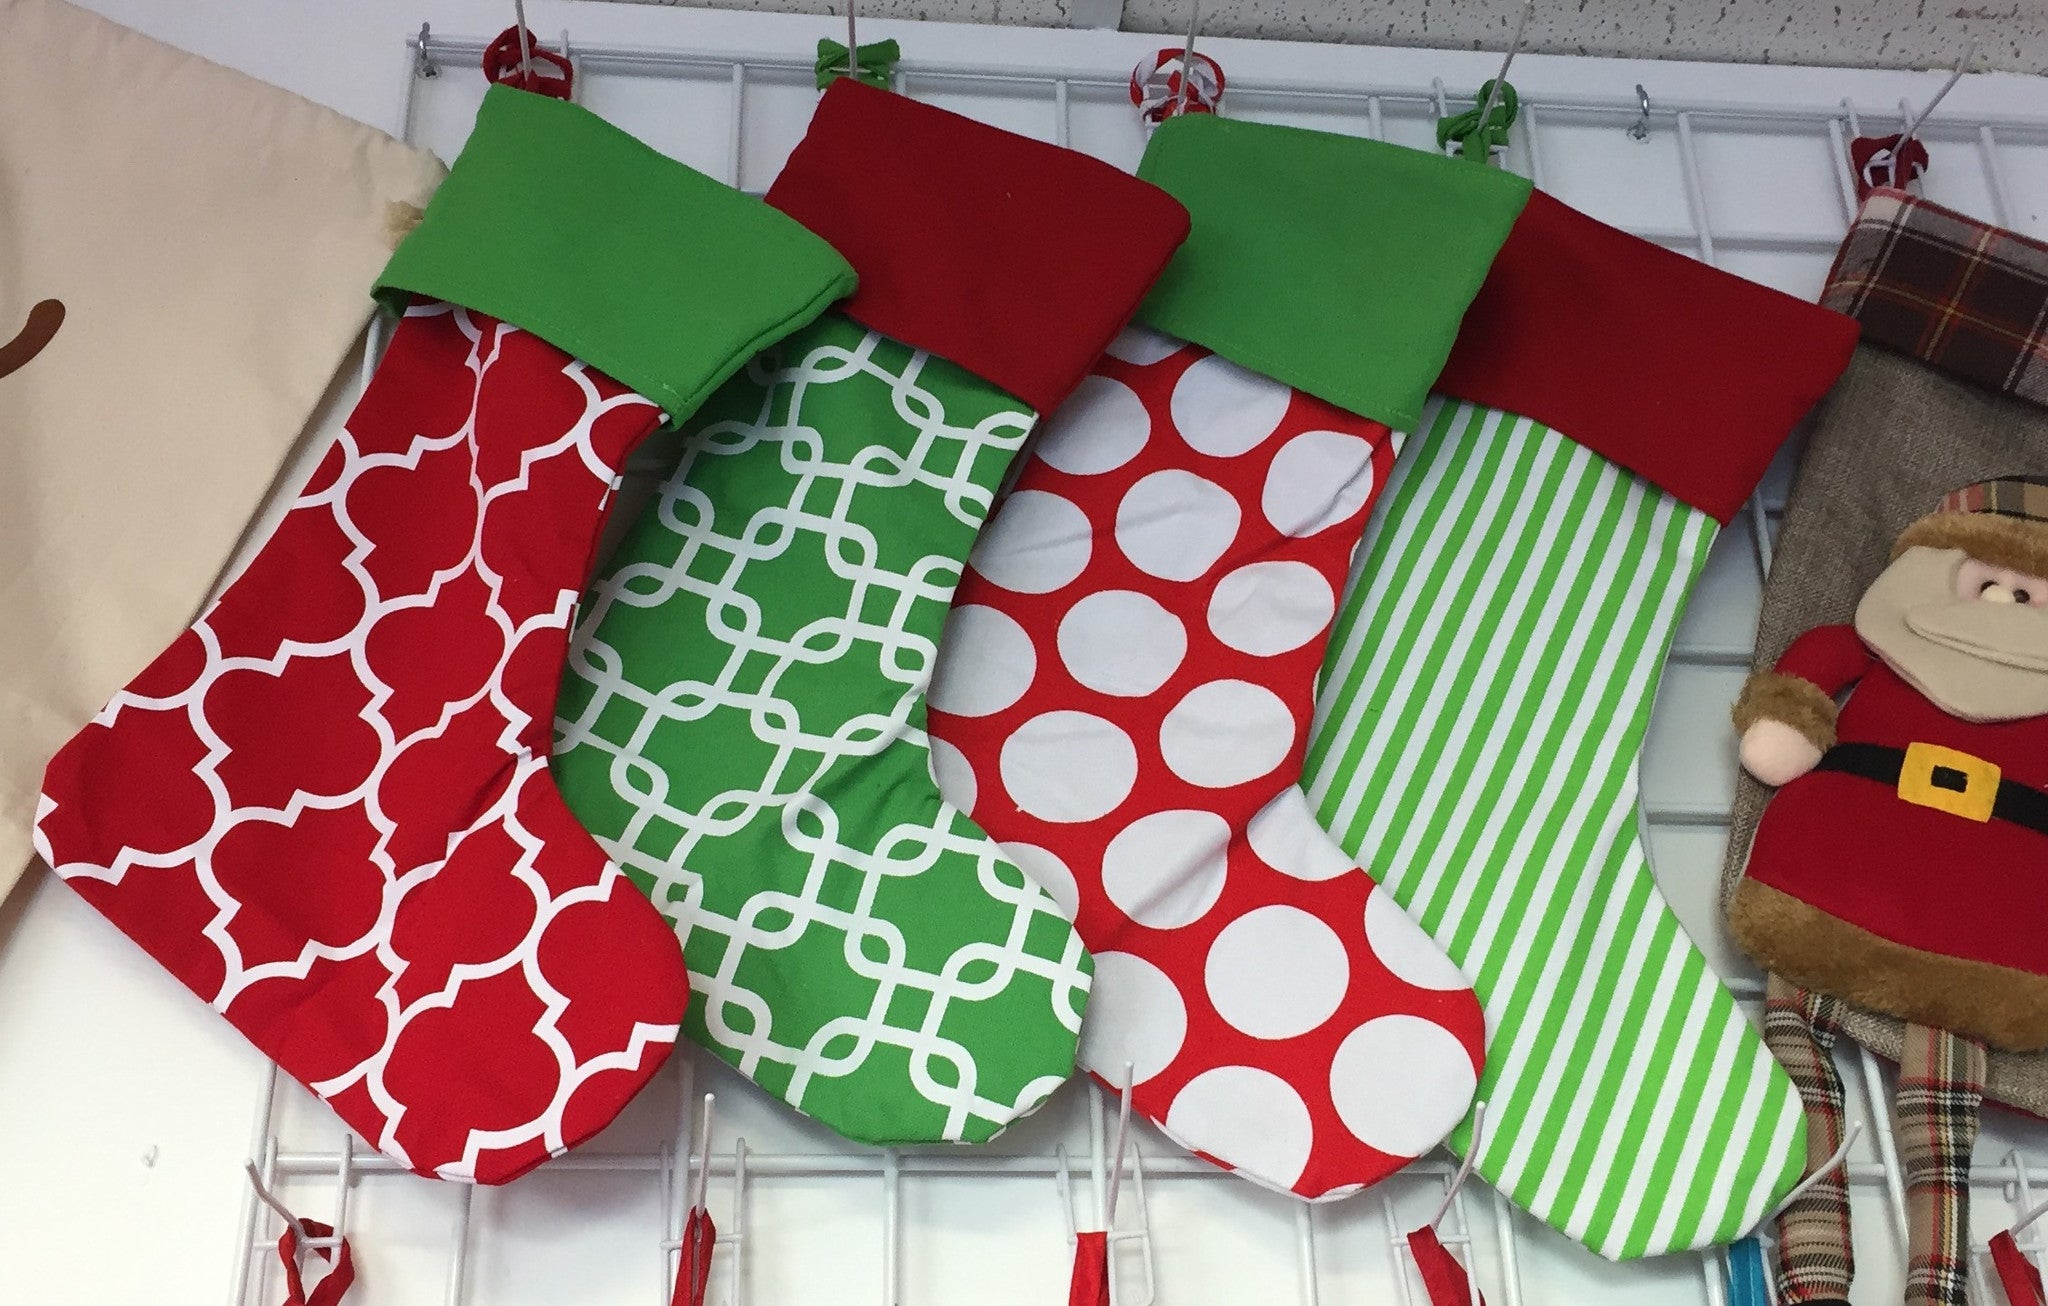 Canvas Christmas Stockings - your choice of pattern, custom embroidered with name at top!